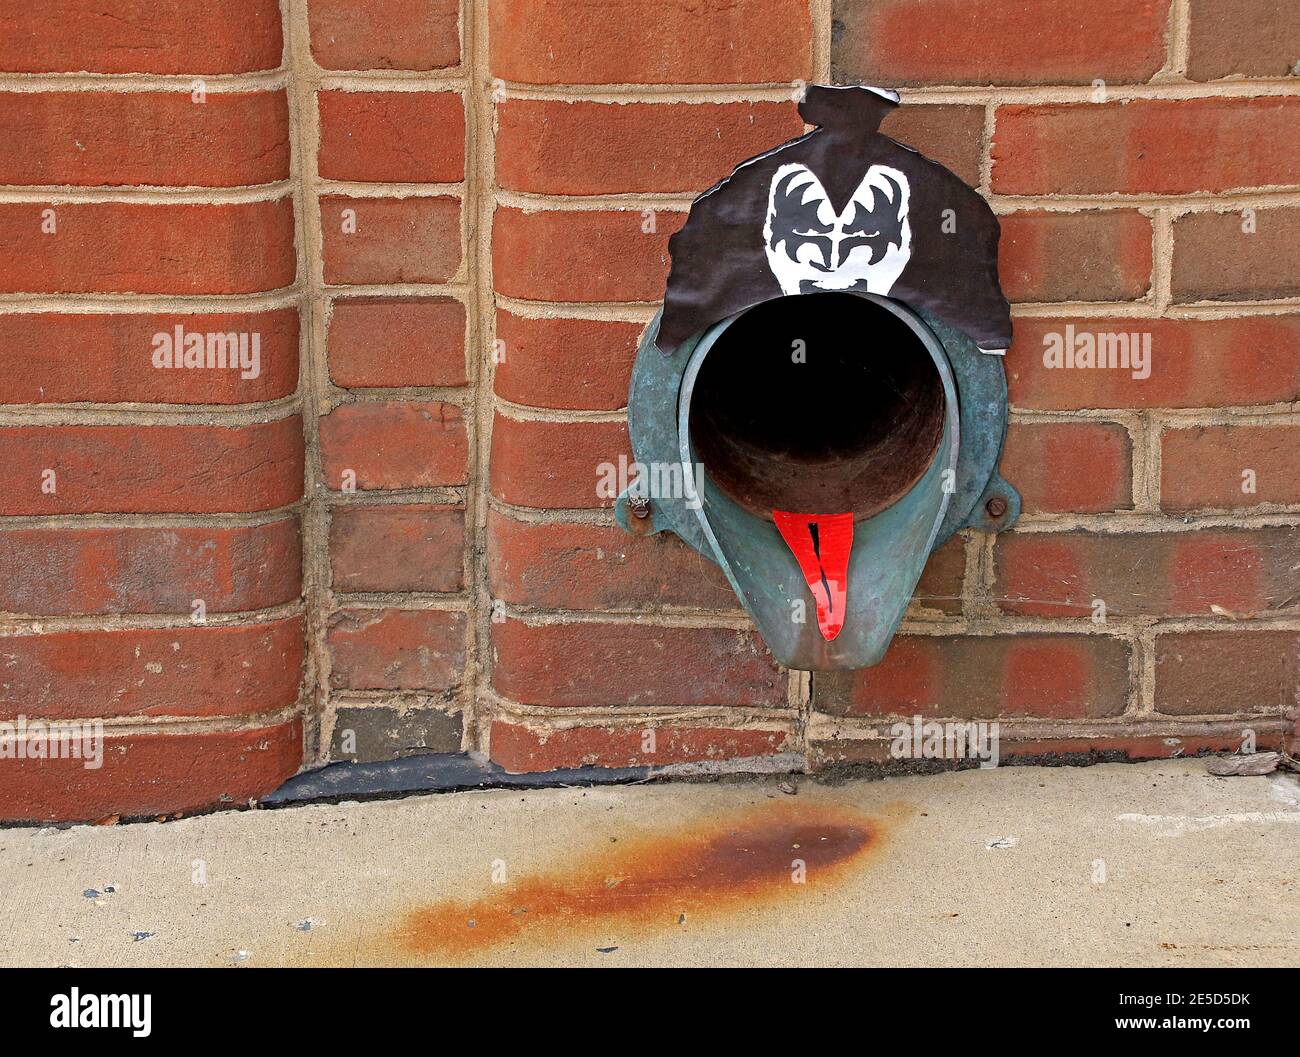 Downspout fashioned into the likeness of Gene Simmons of the rock group KISS. Stock Photo